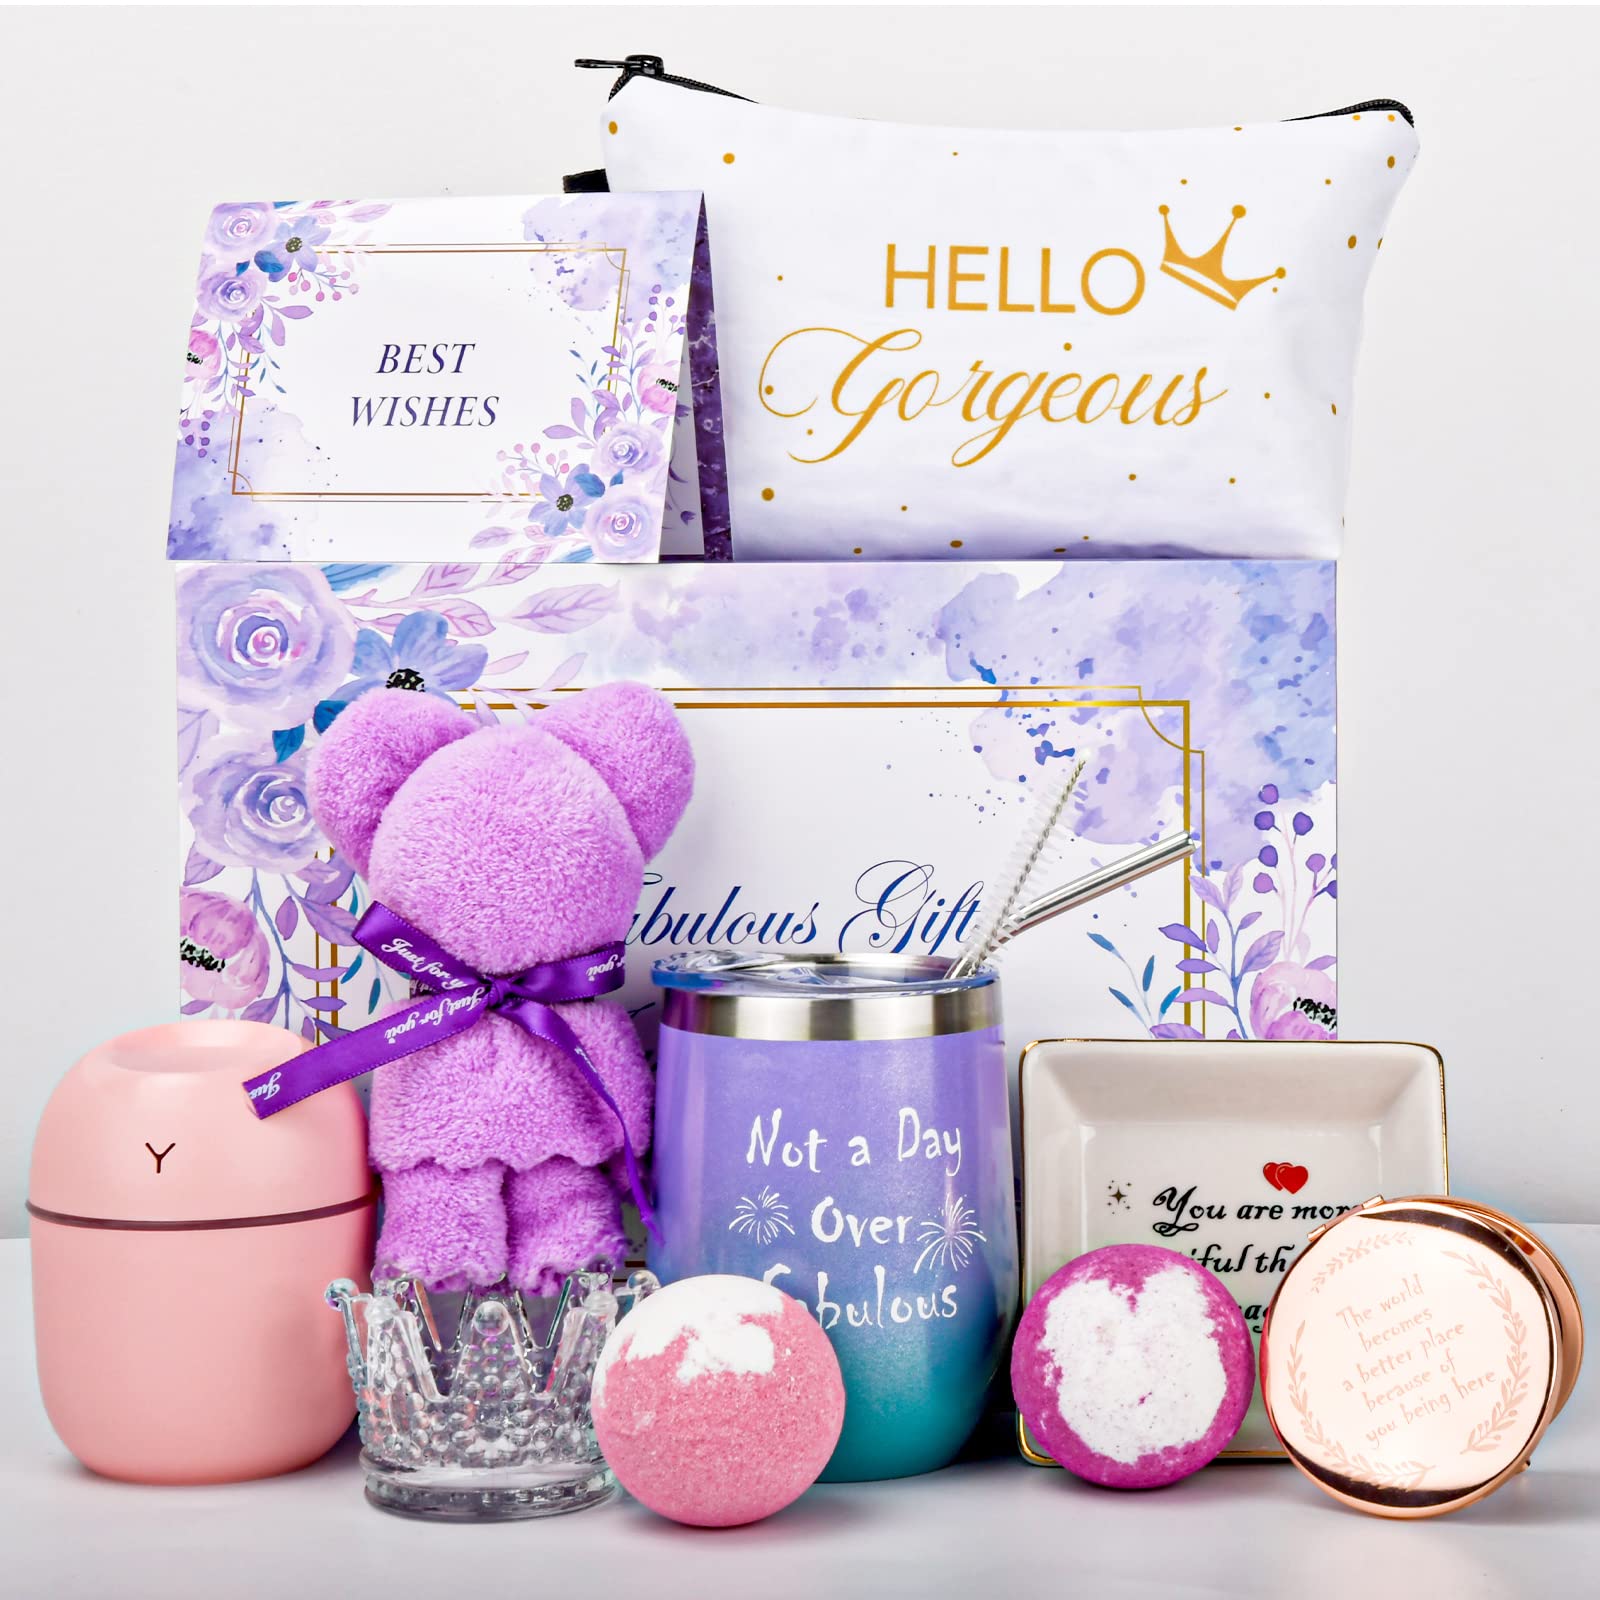 Birthday Gifts for Women, Friendship Gifts for Women Friends, Relaxing Spa  Gift Baskets for Women, Happy Birthday Gift Box for Mom Wife Girlfriend  Sister Friends Female, Thank You Gifts for Women 